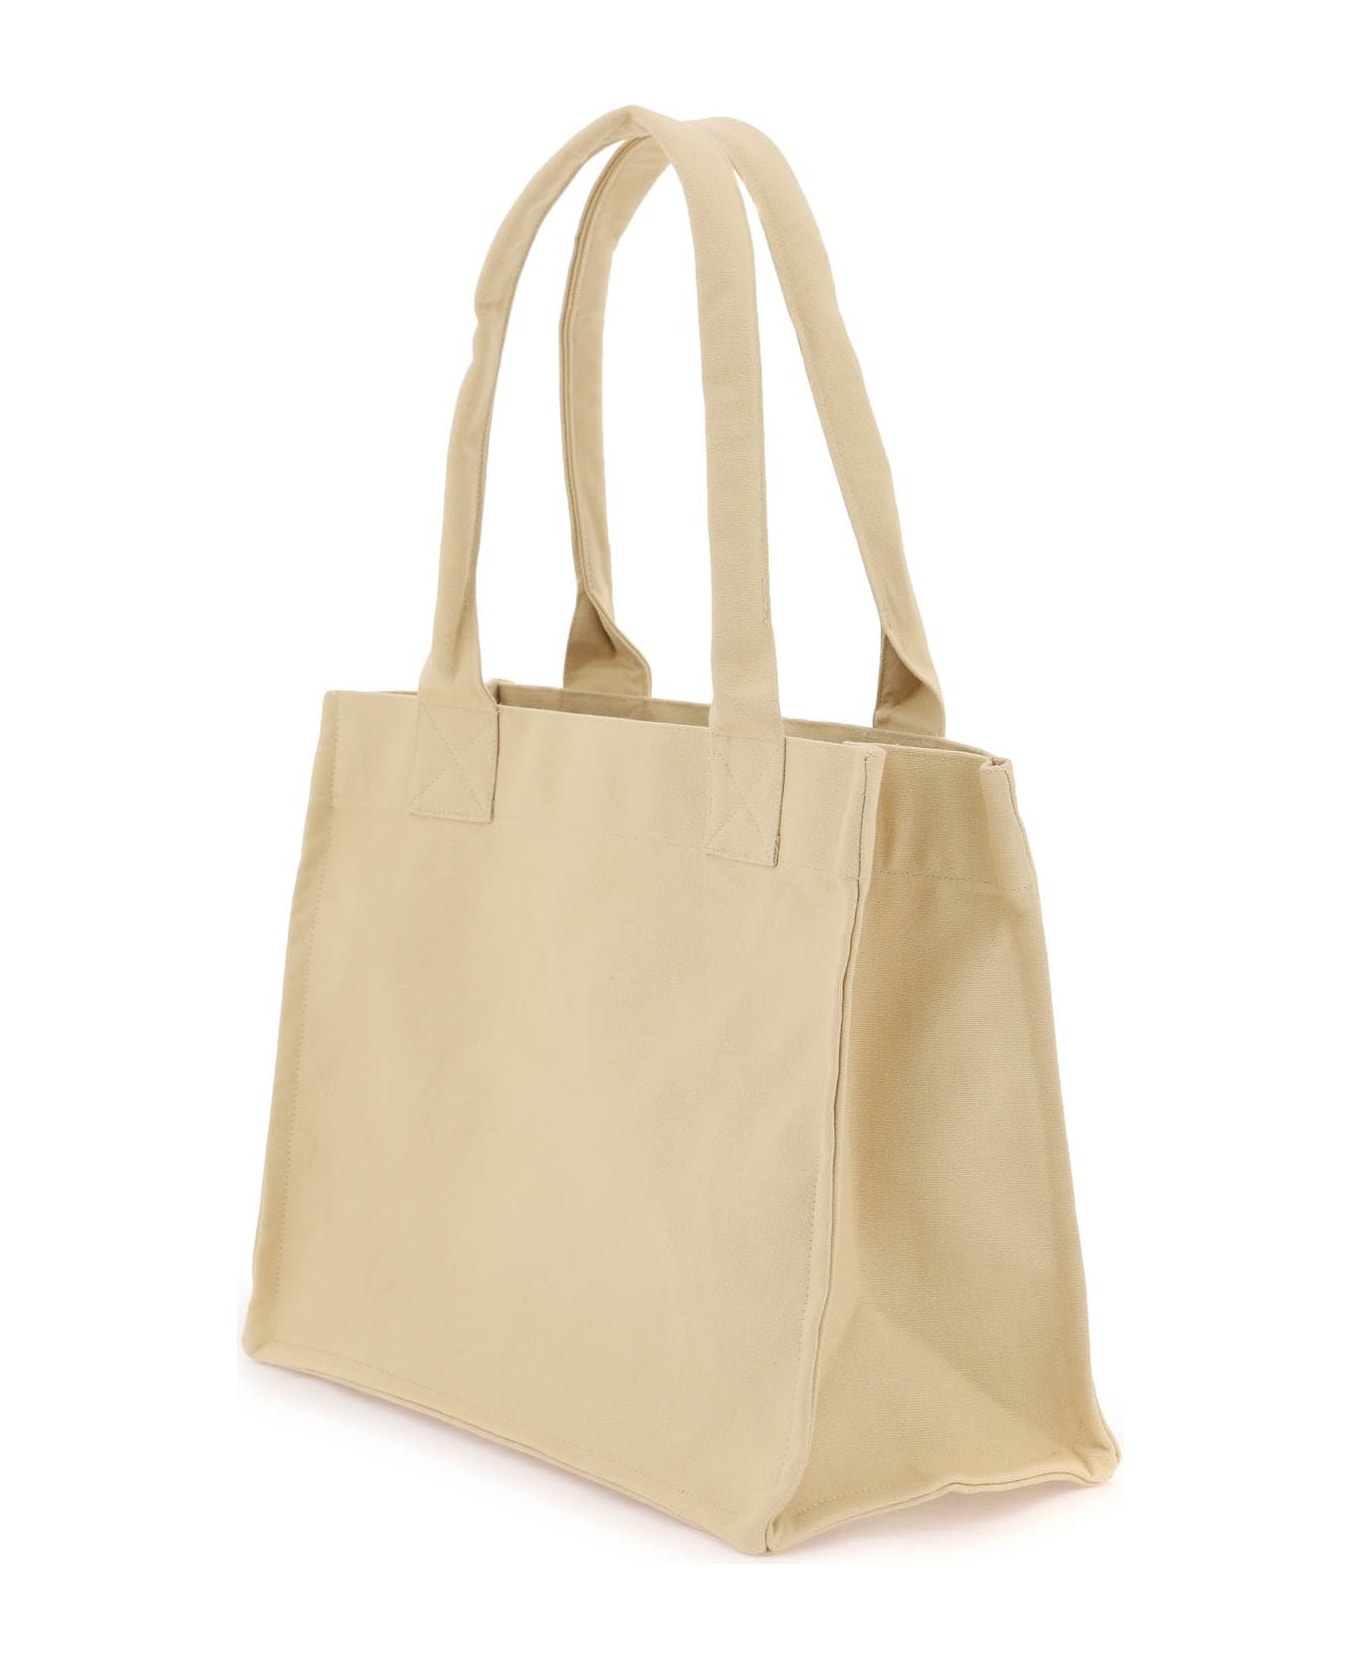 Ganni Tote Bag With Embroidery - BUTTERCREAM (Beige) トートバッグ